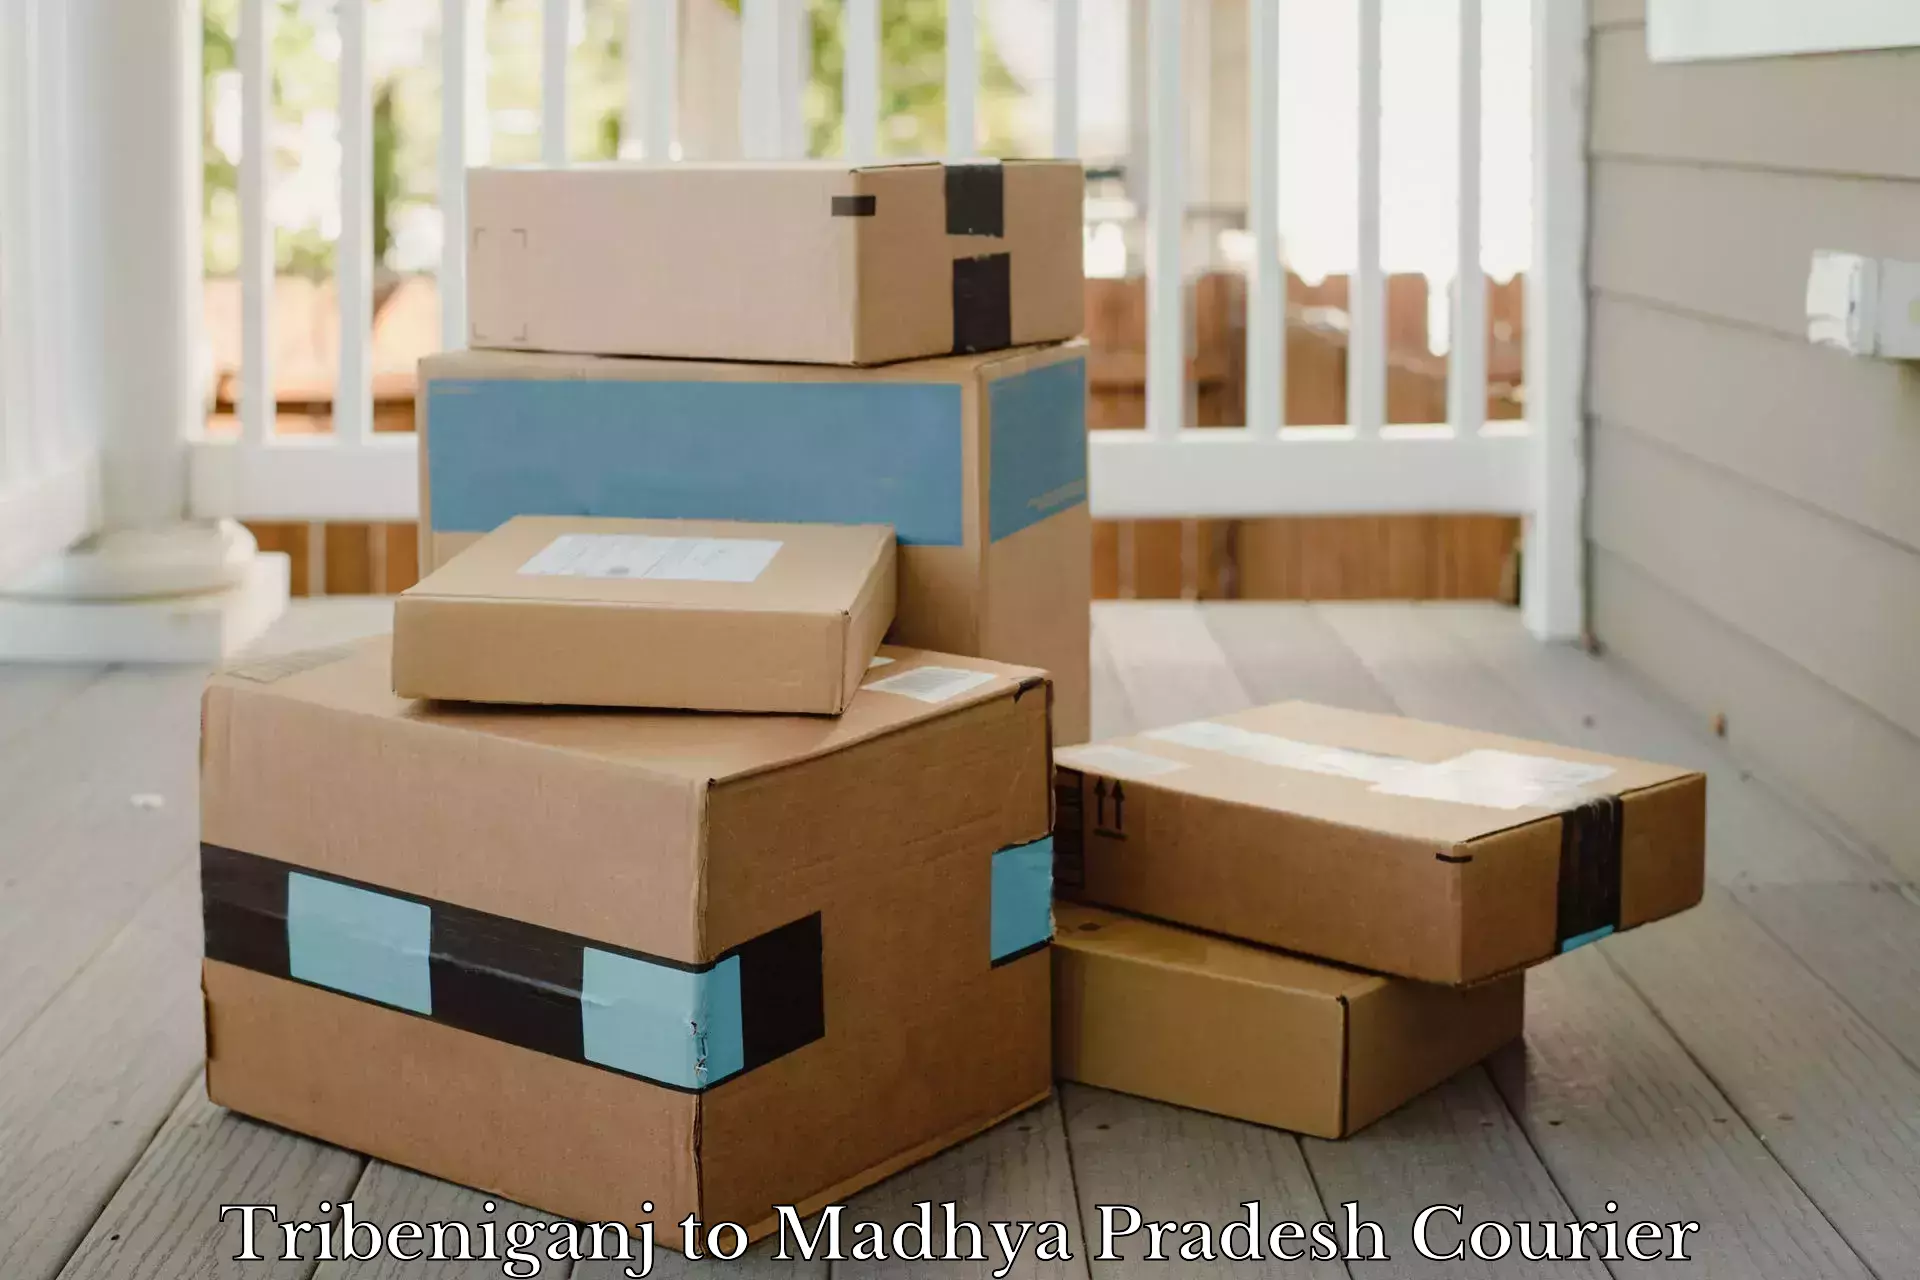 Professional courier handling in Tribeniganj to Gwalior